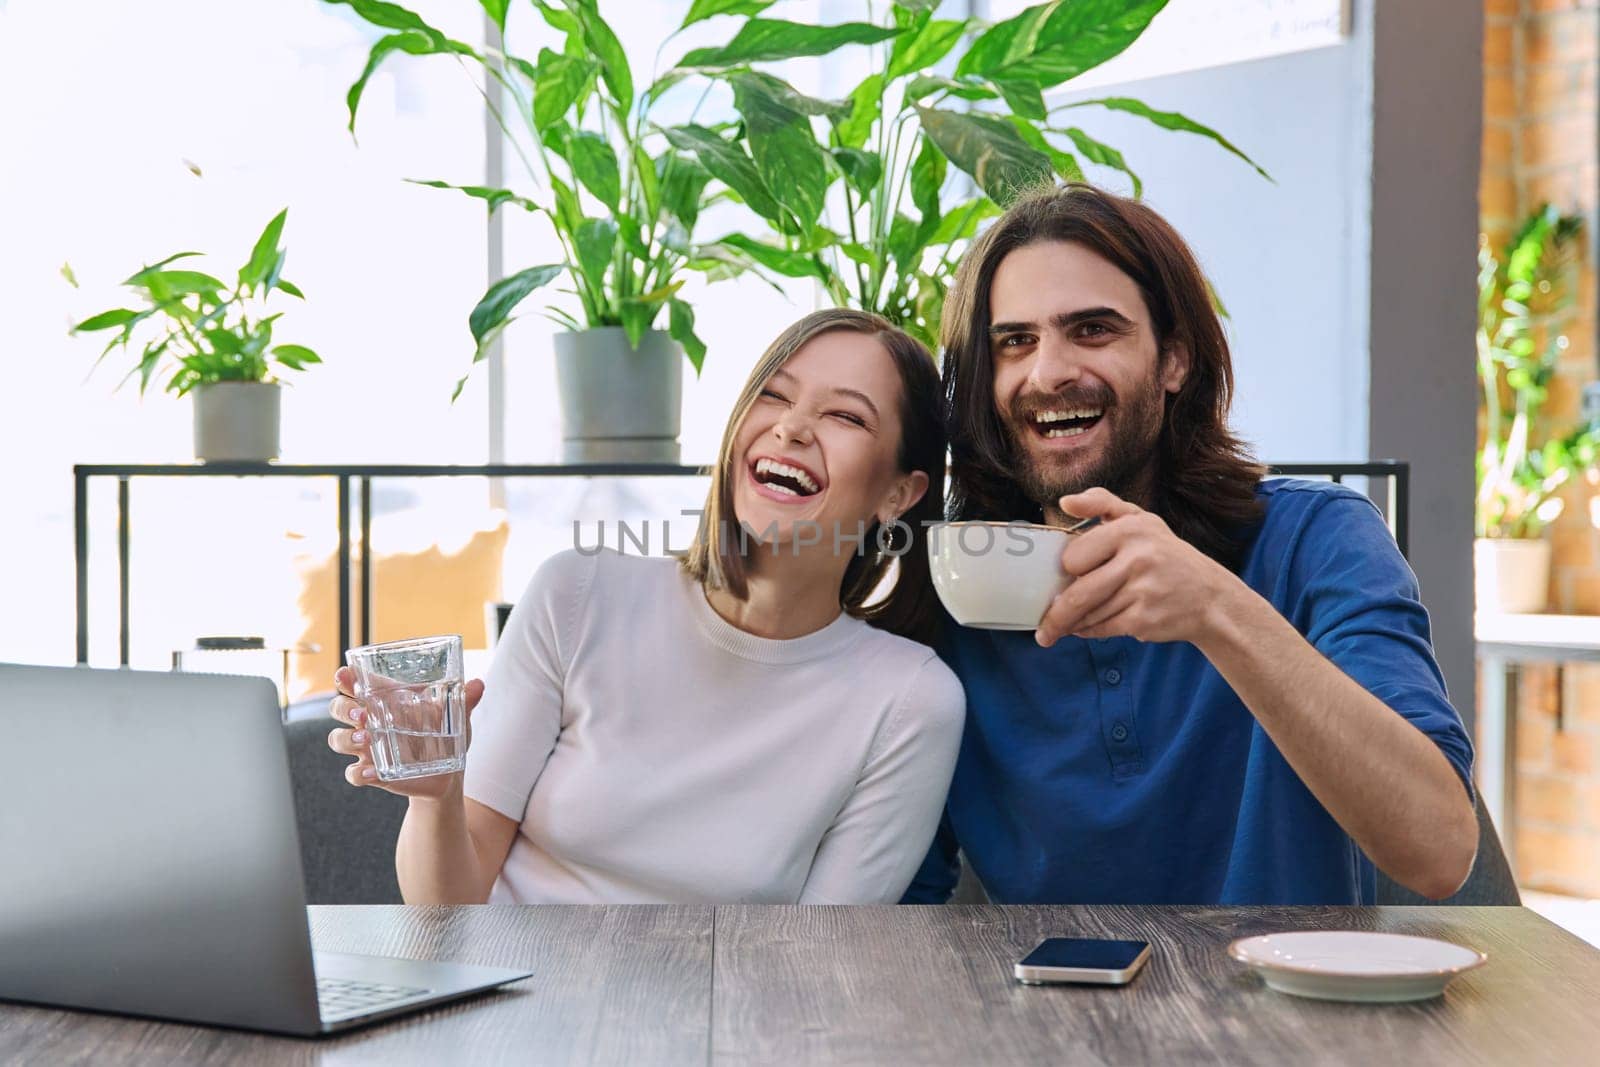 Happy joyful laughing young couple looking at laptop together while sitting in cafeteria. Leisure time for two, communication, togetherness, relationship, lifestyle, work, study remotely